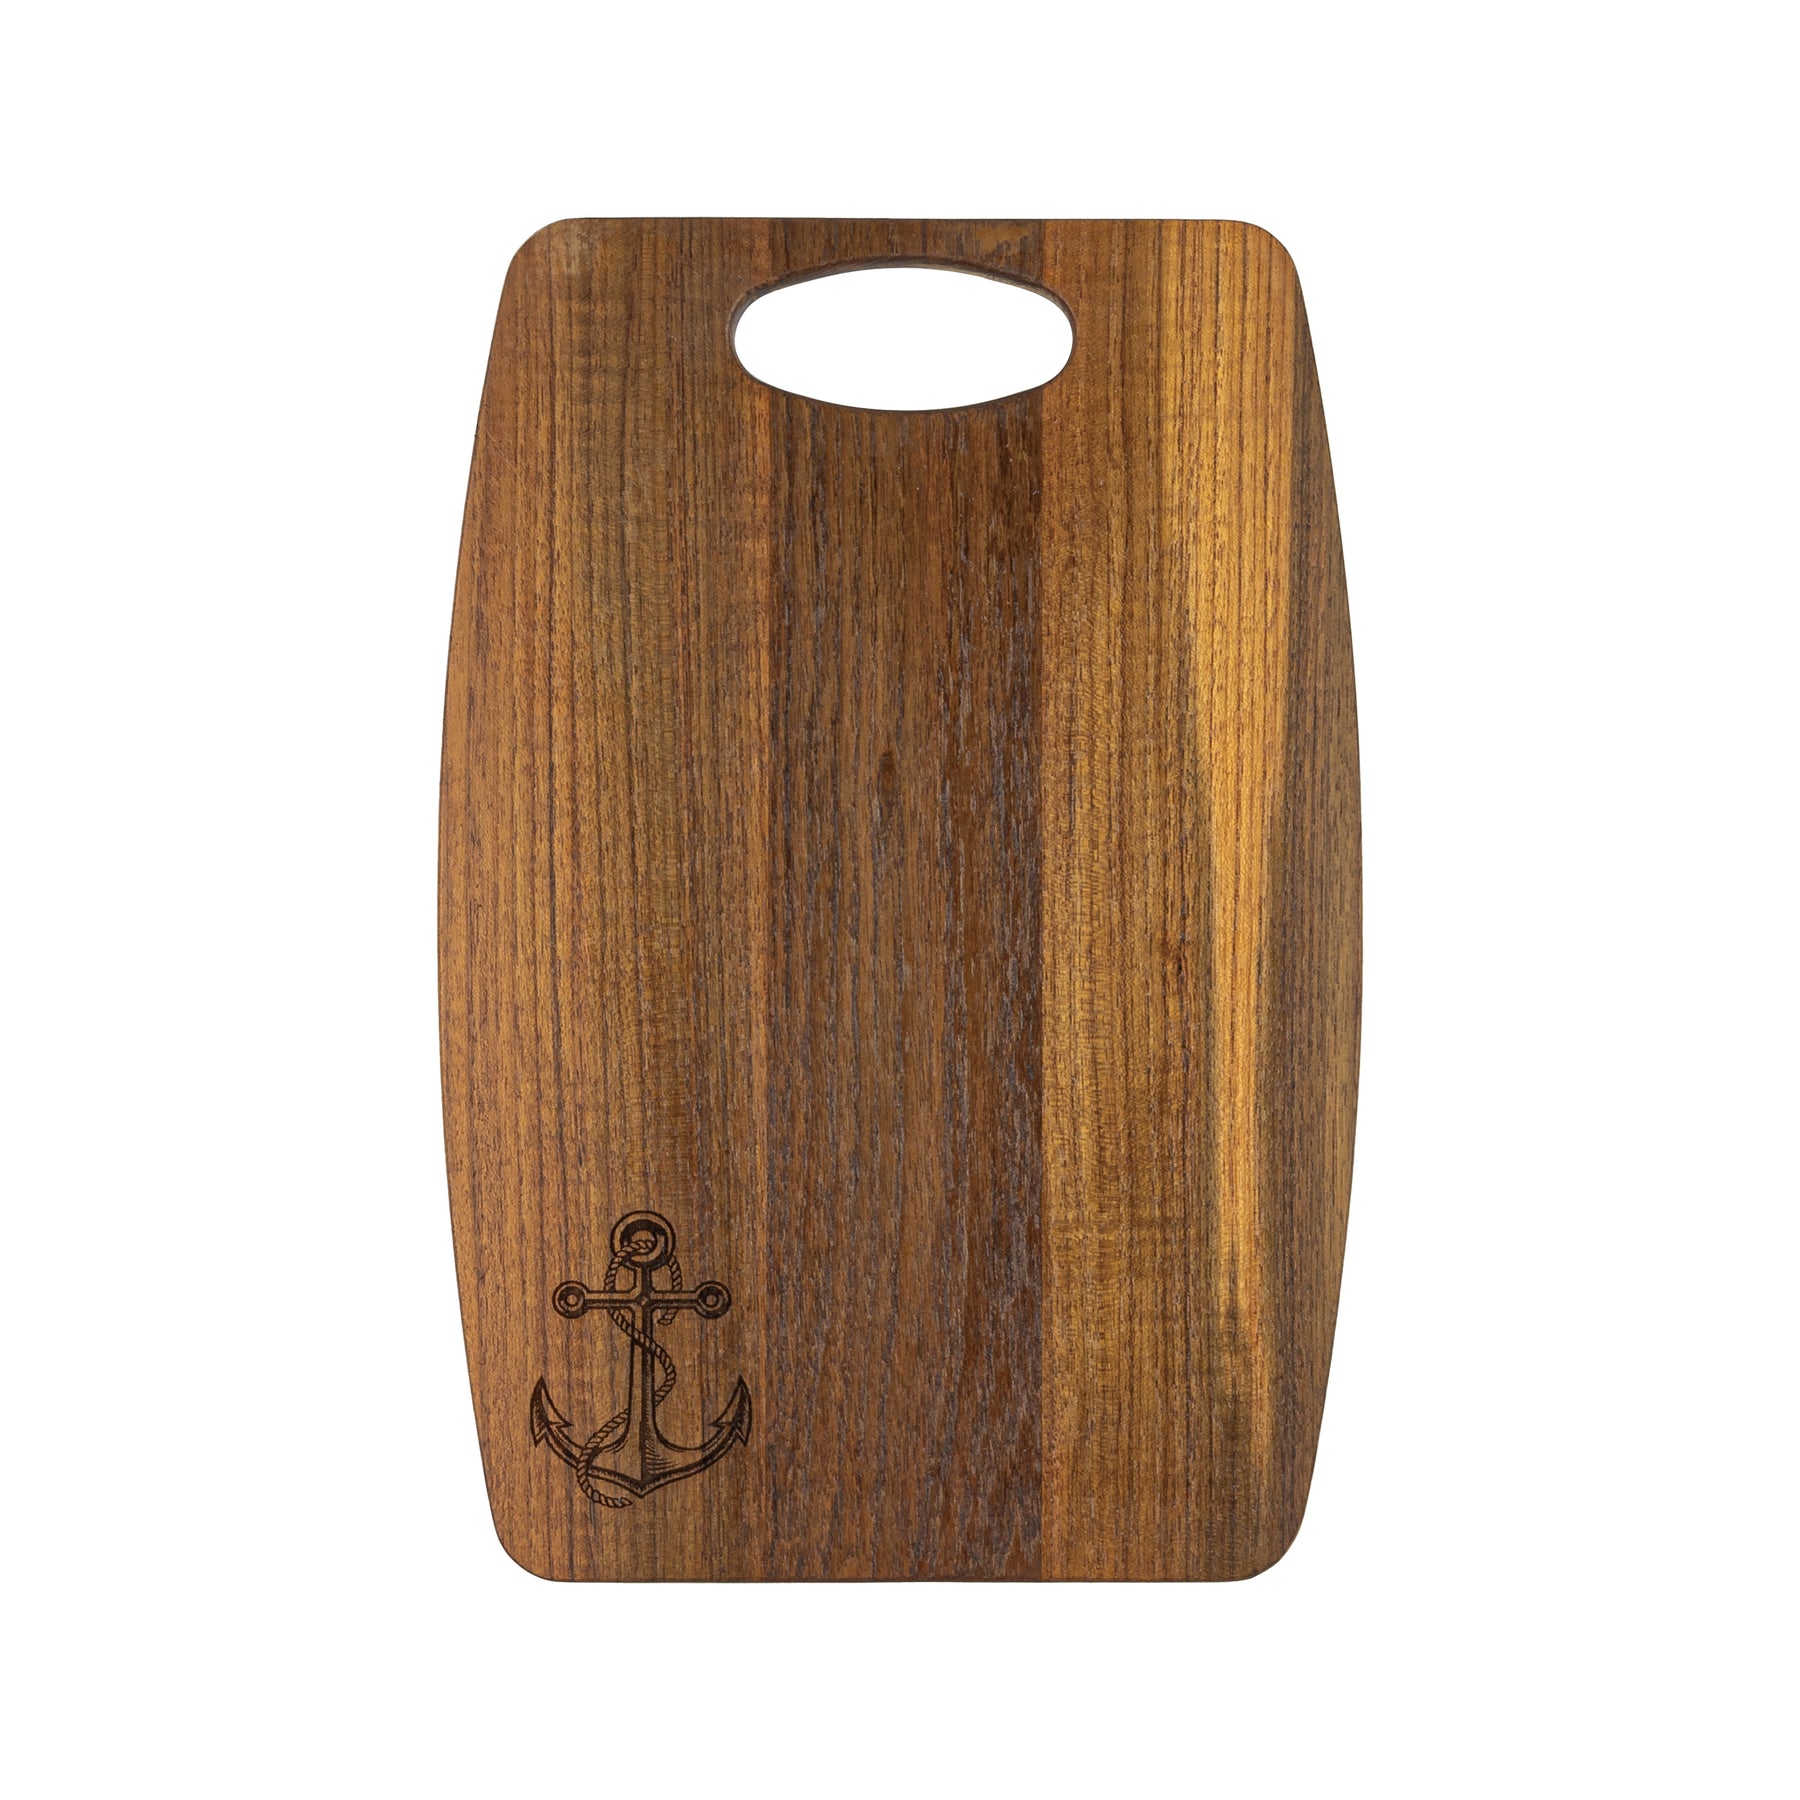 Chef's Collection Teak Bread Board - Anchor - 8" x 14" - 60761ANCC